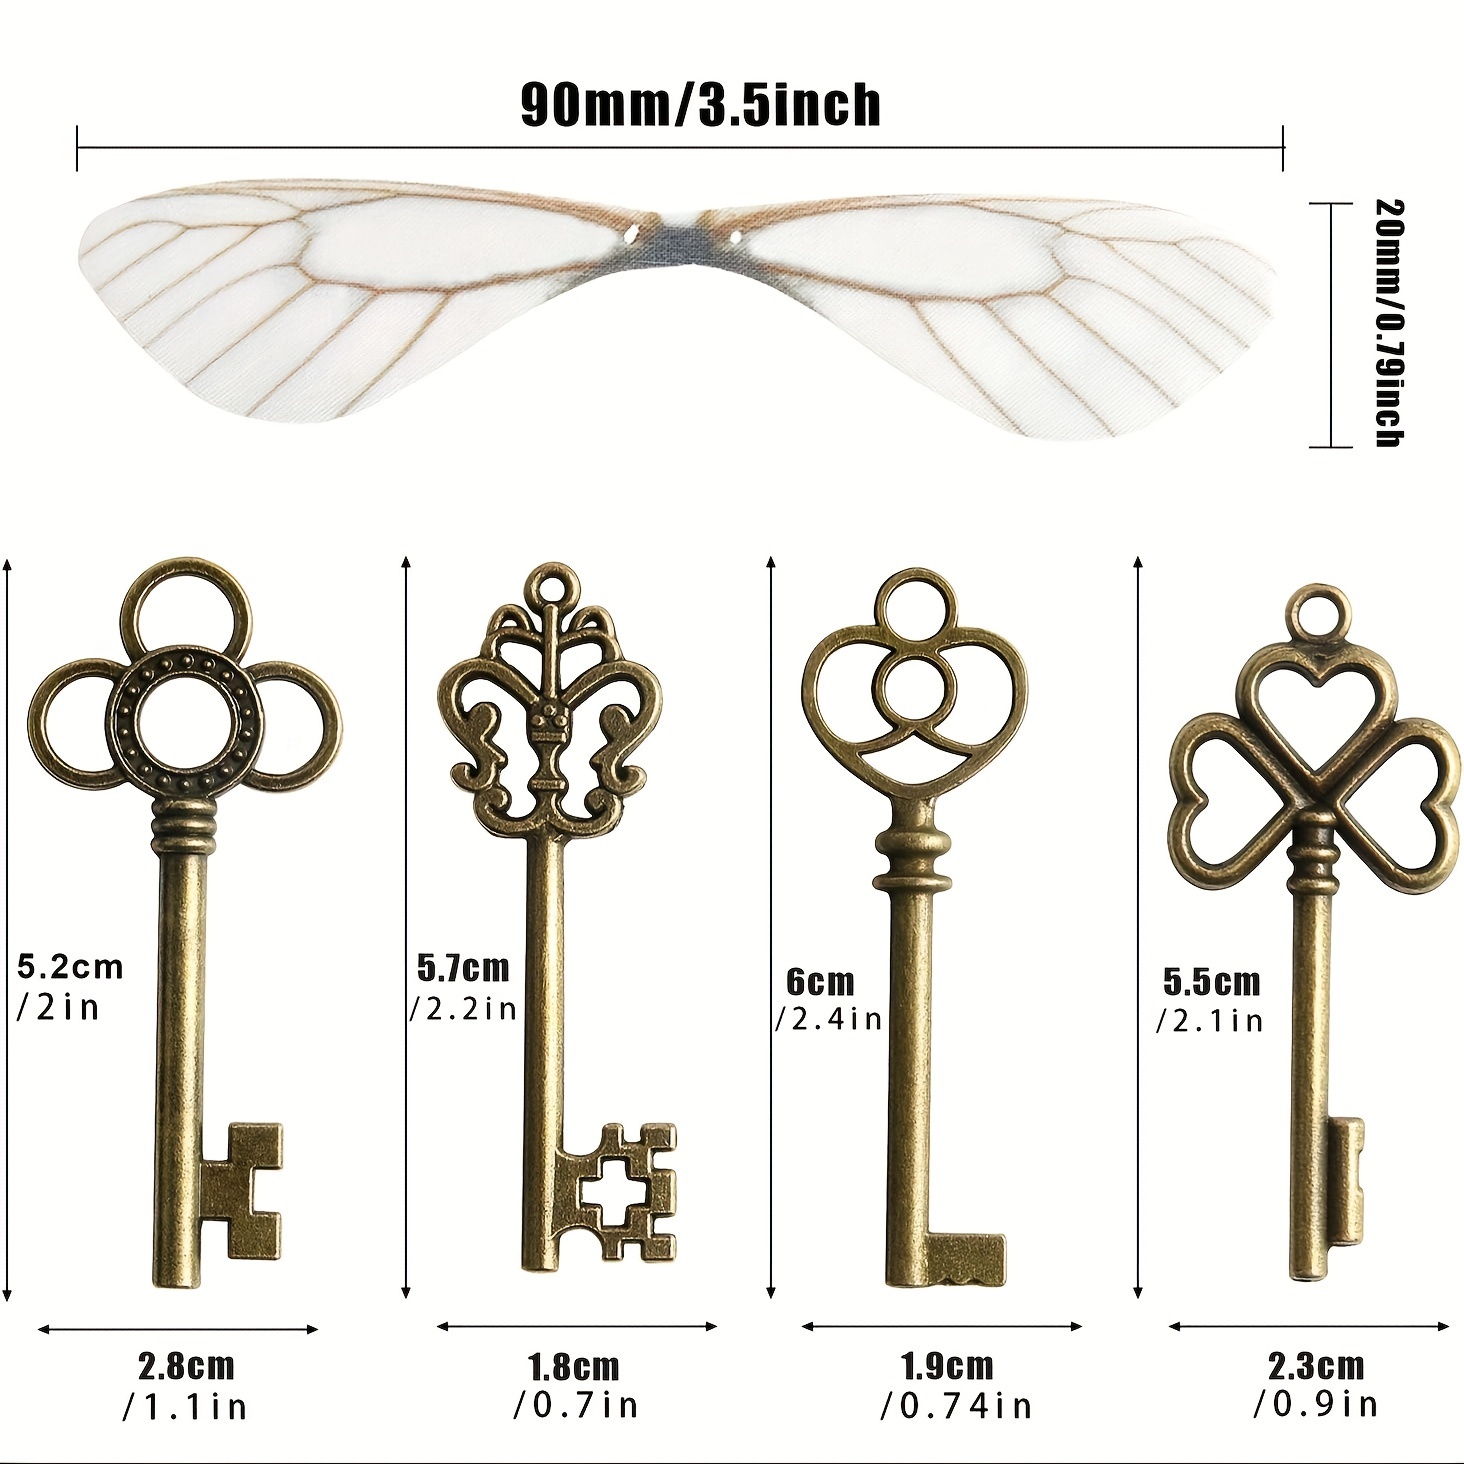 Aokbean 50 Pcs Vintage Skeleton Flying Keys Charms Pendant Crafts, Metal  Antique Key with Dragonfly Wings for DIY Jewelry Making Necklace Keychain